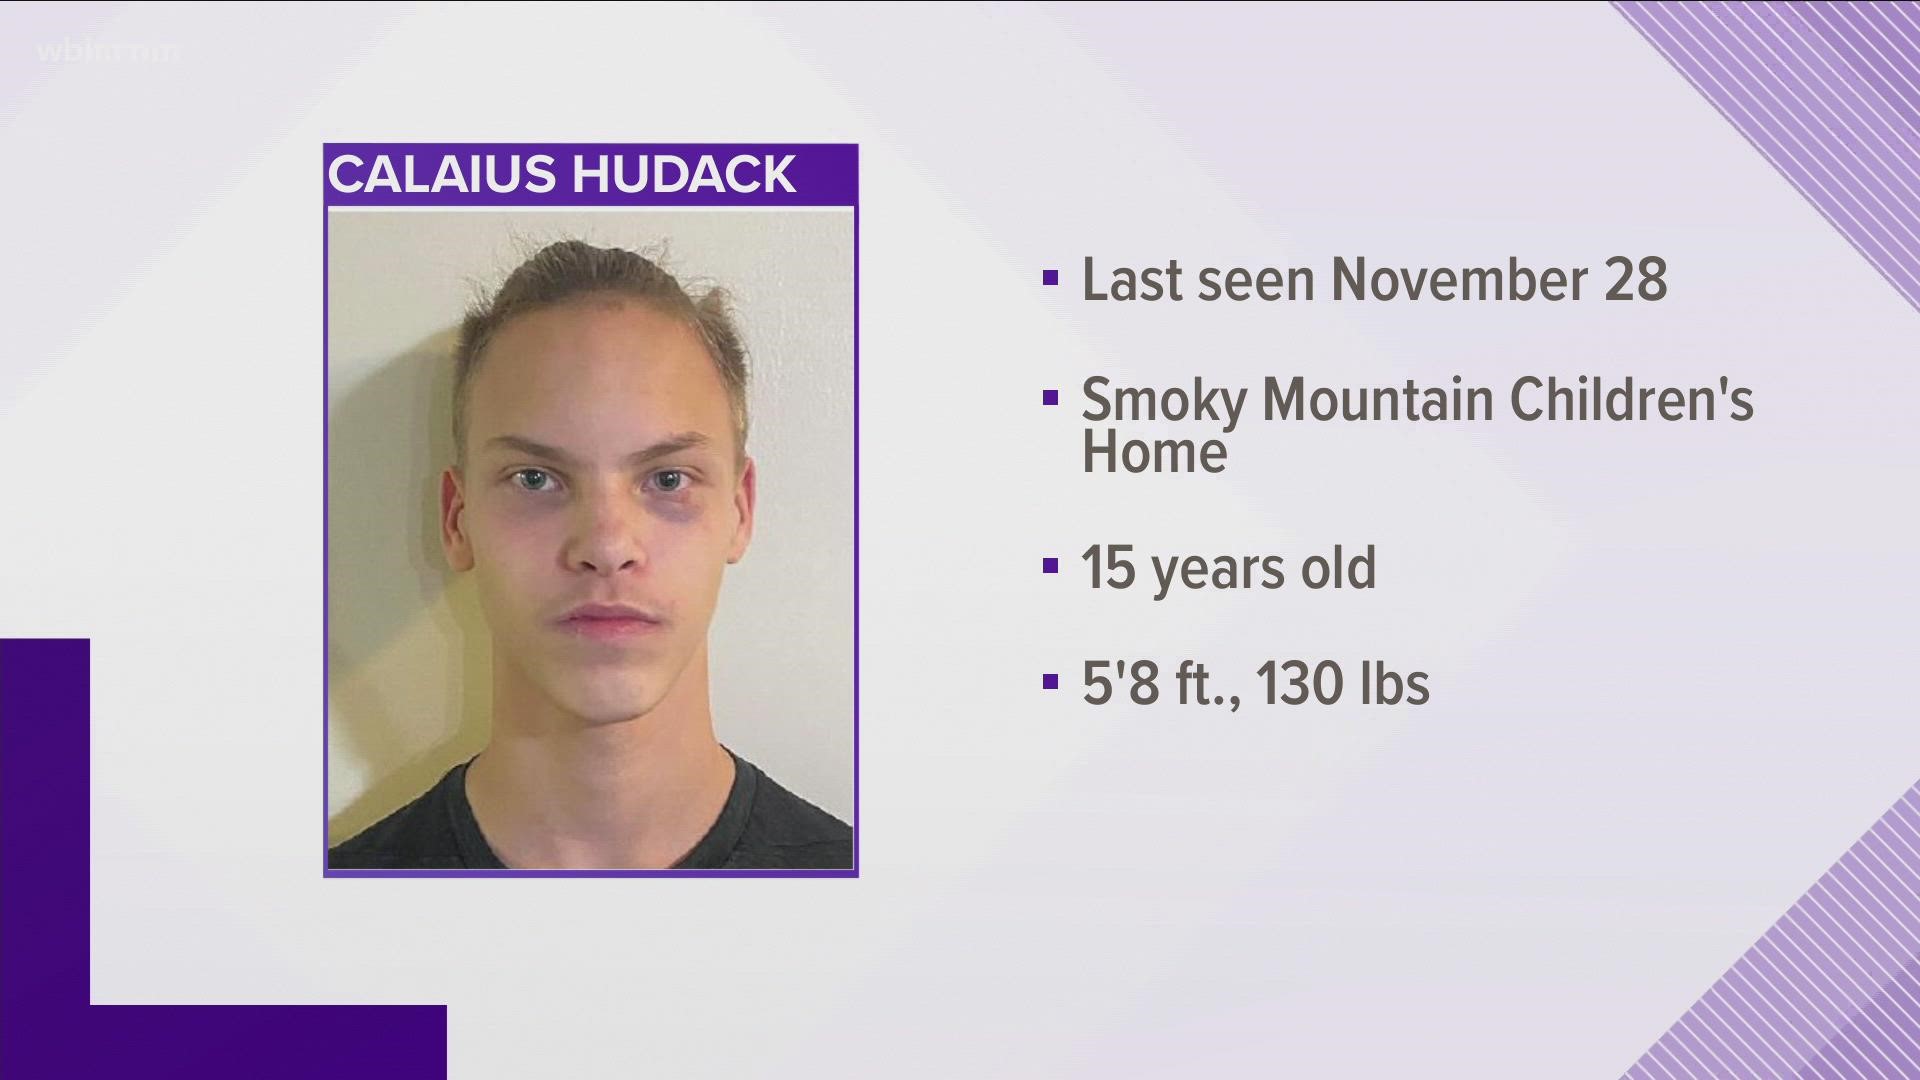 Sevierville Police say that Calaius Hudack left the Smoky Mountain Children's Home on November 28 has been missing since.